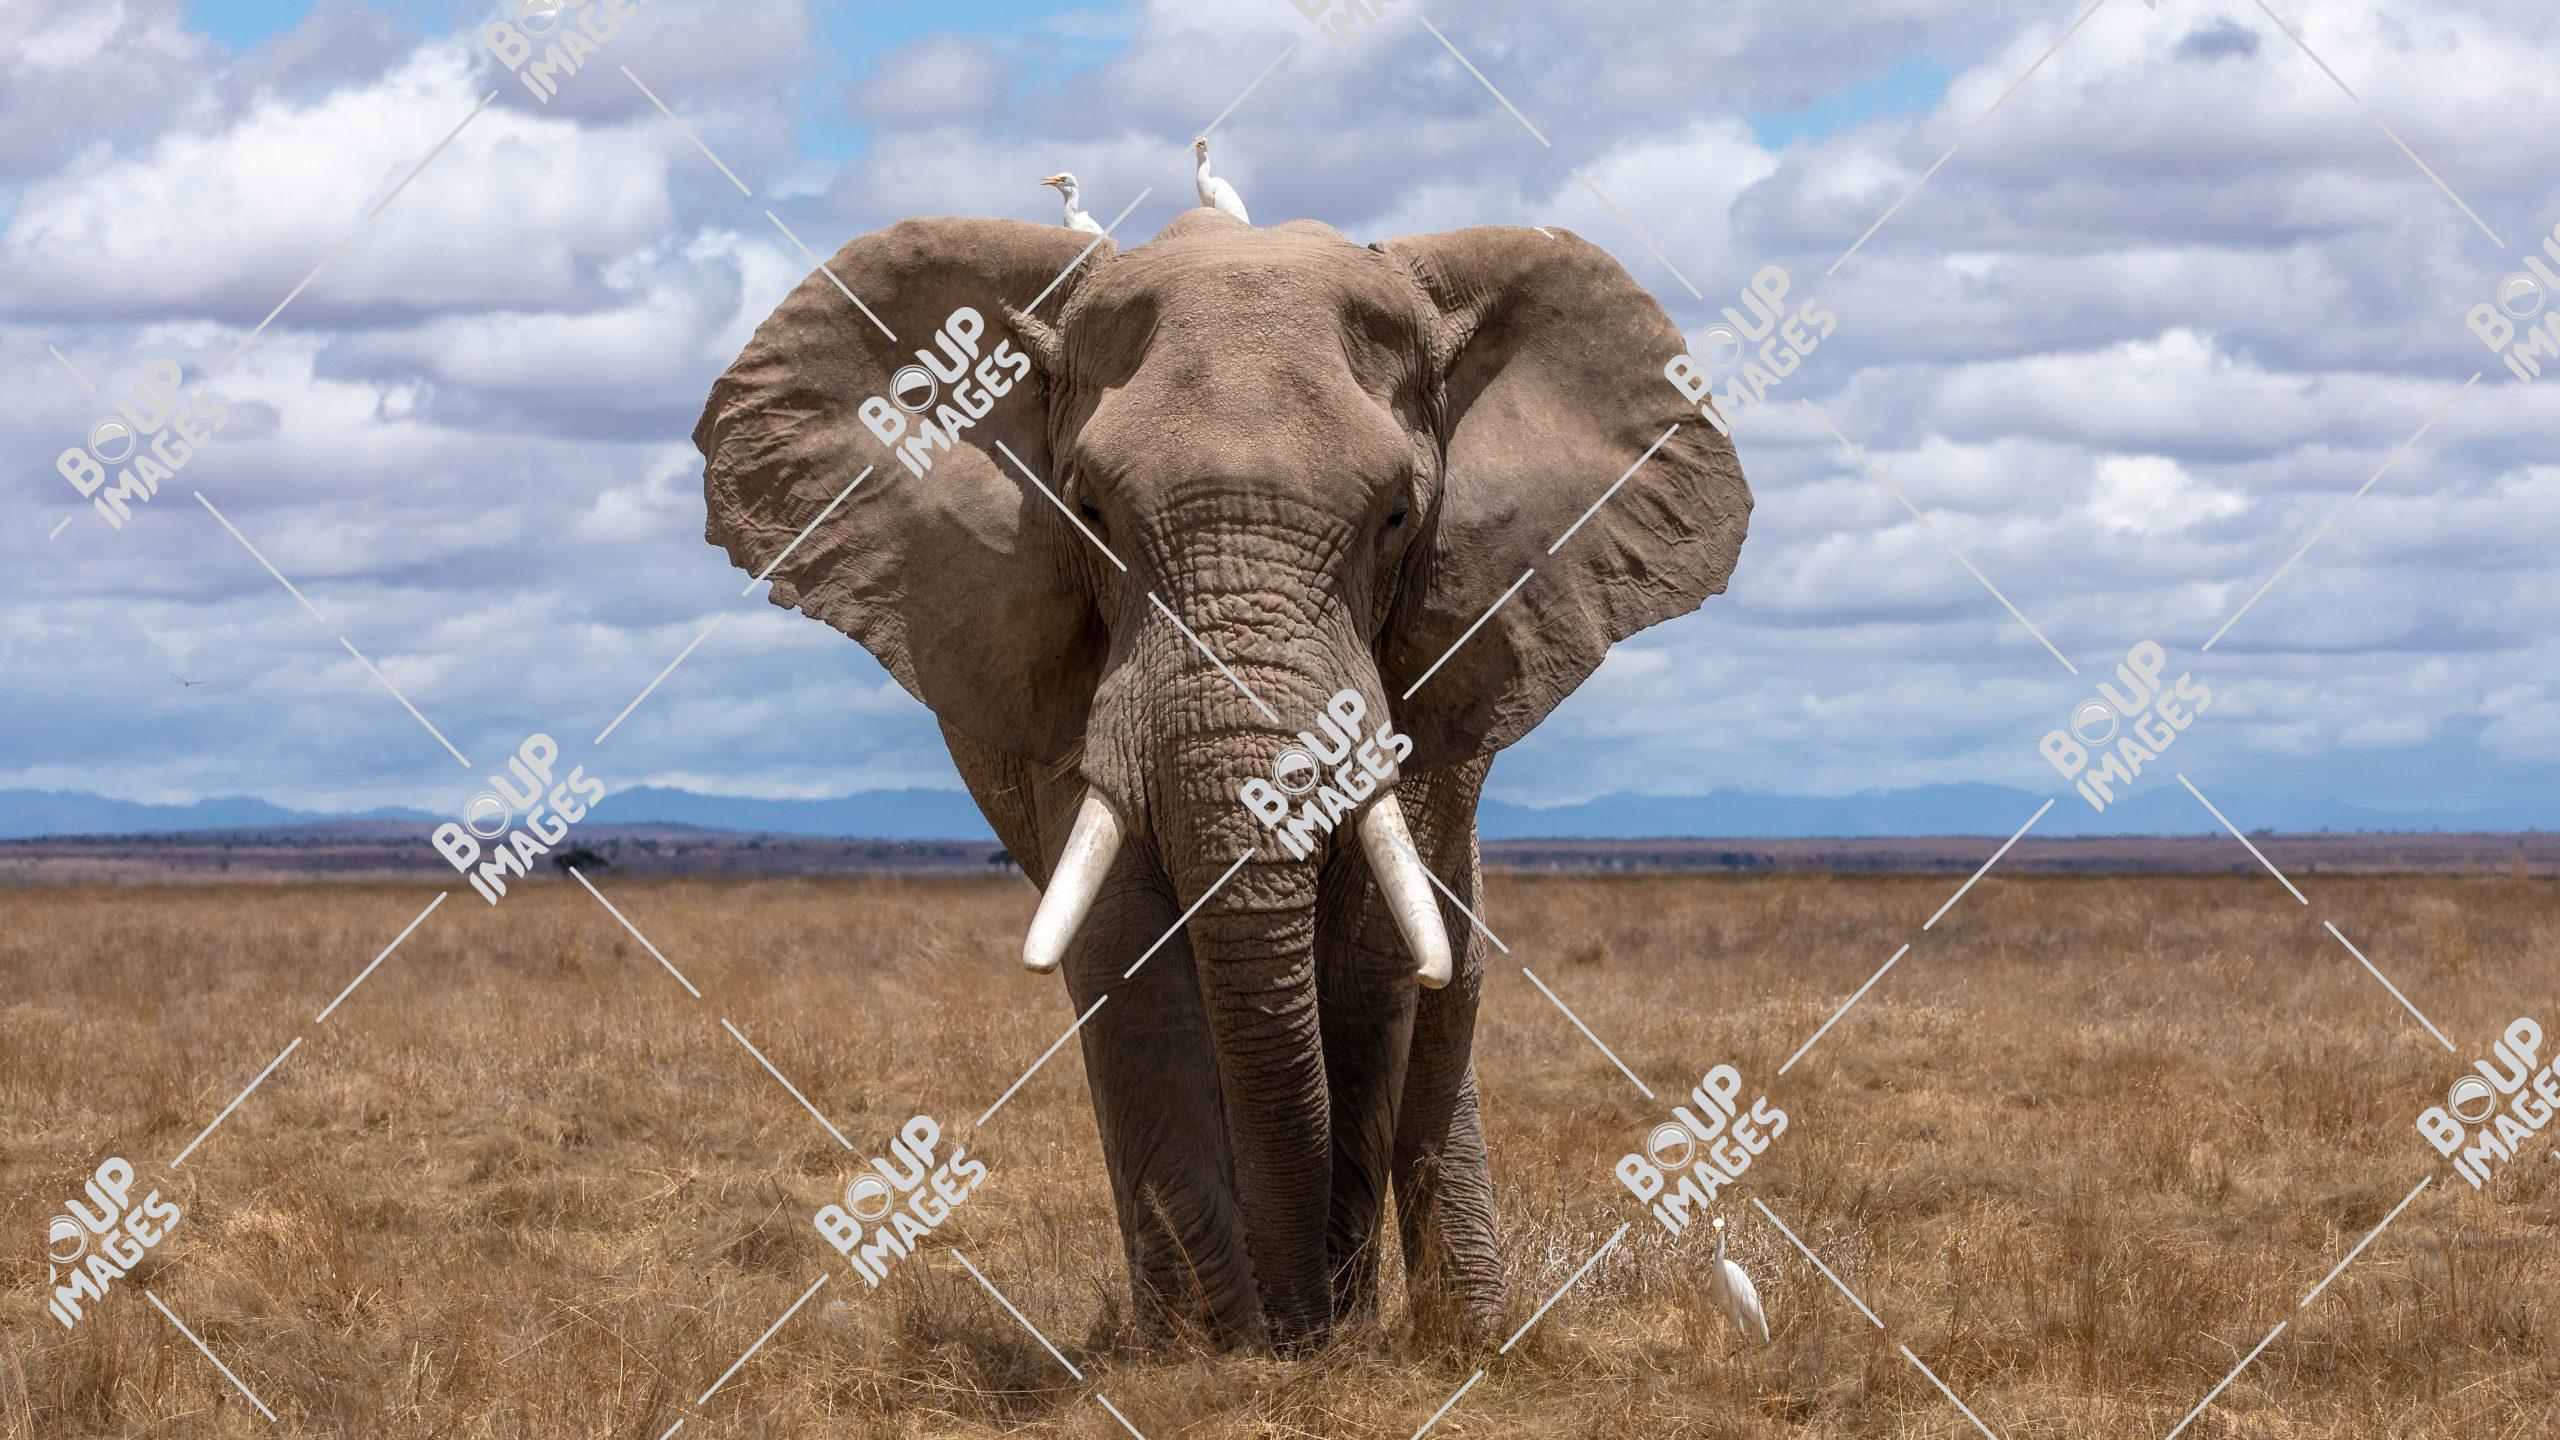 Elephant Images & Pictures